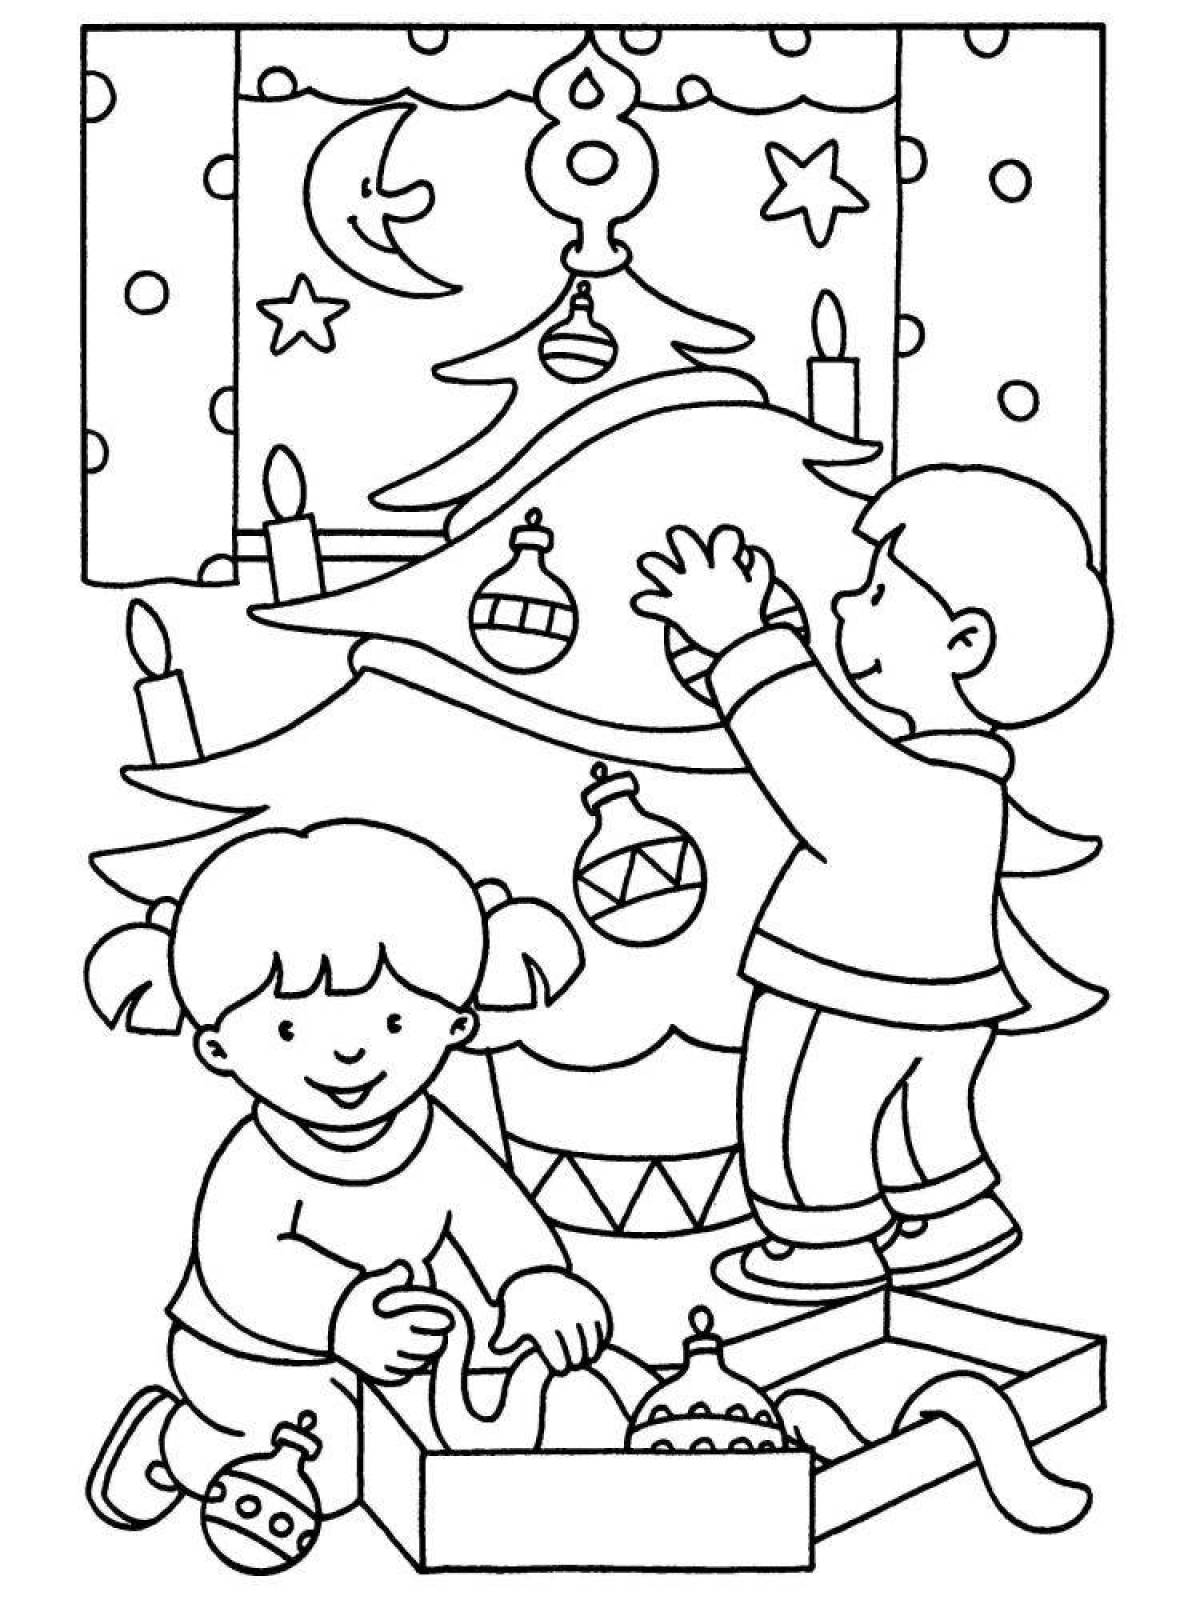 Fun coloring christmas pictures